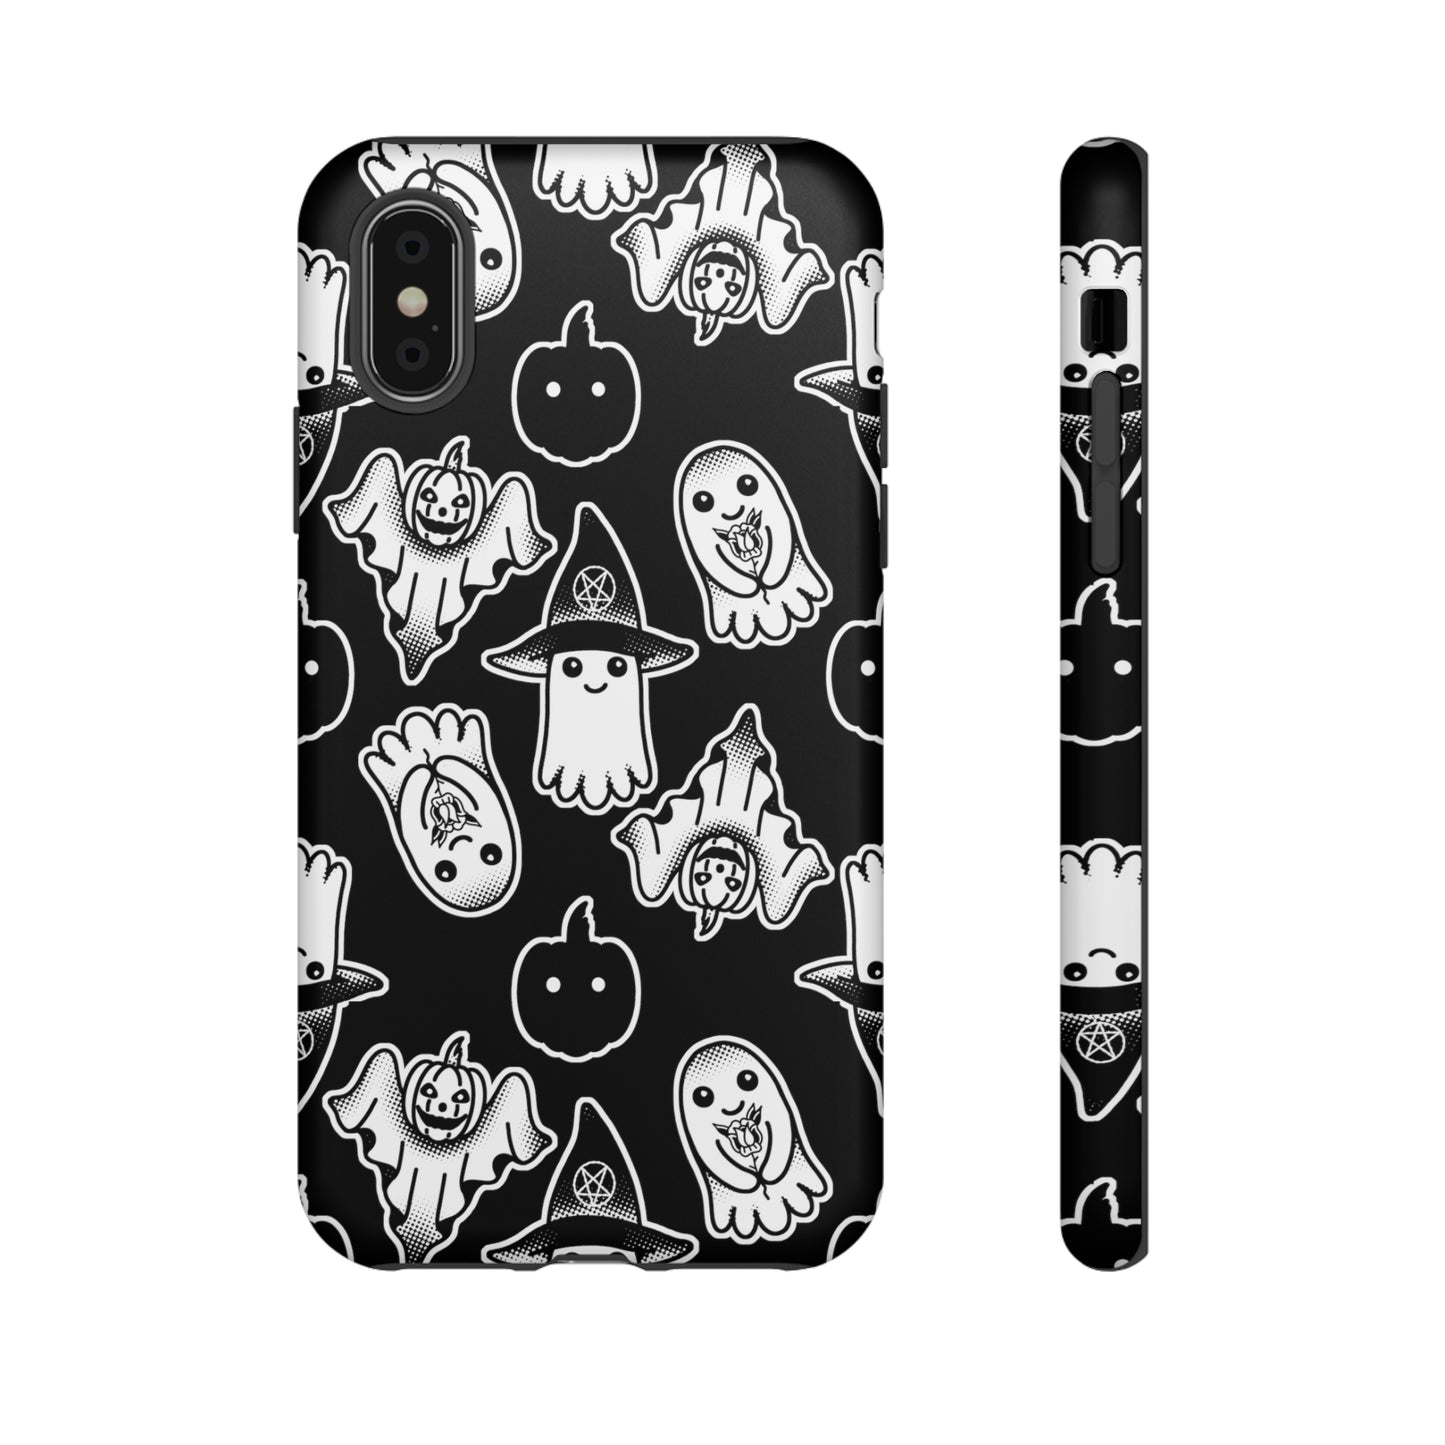 Spooky Ghosts Tough Phone Case